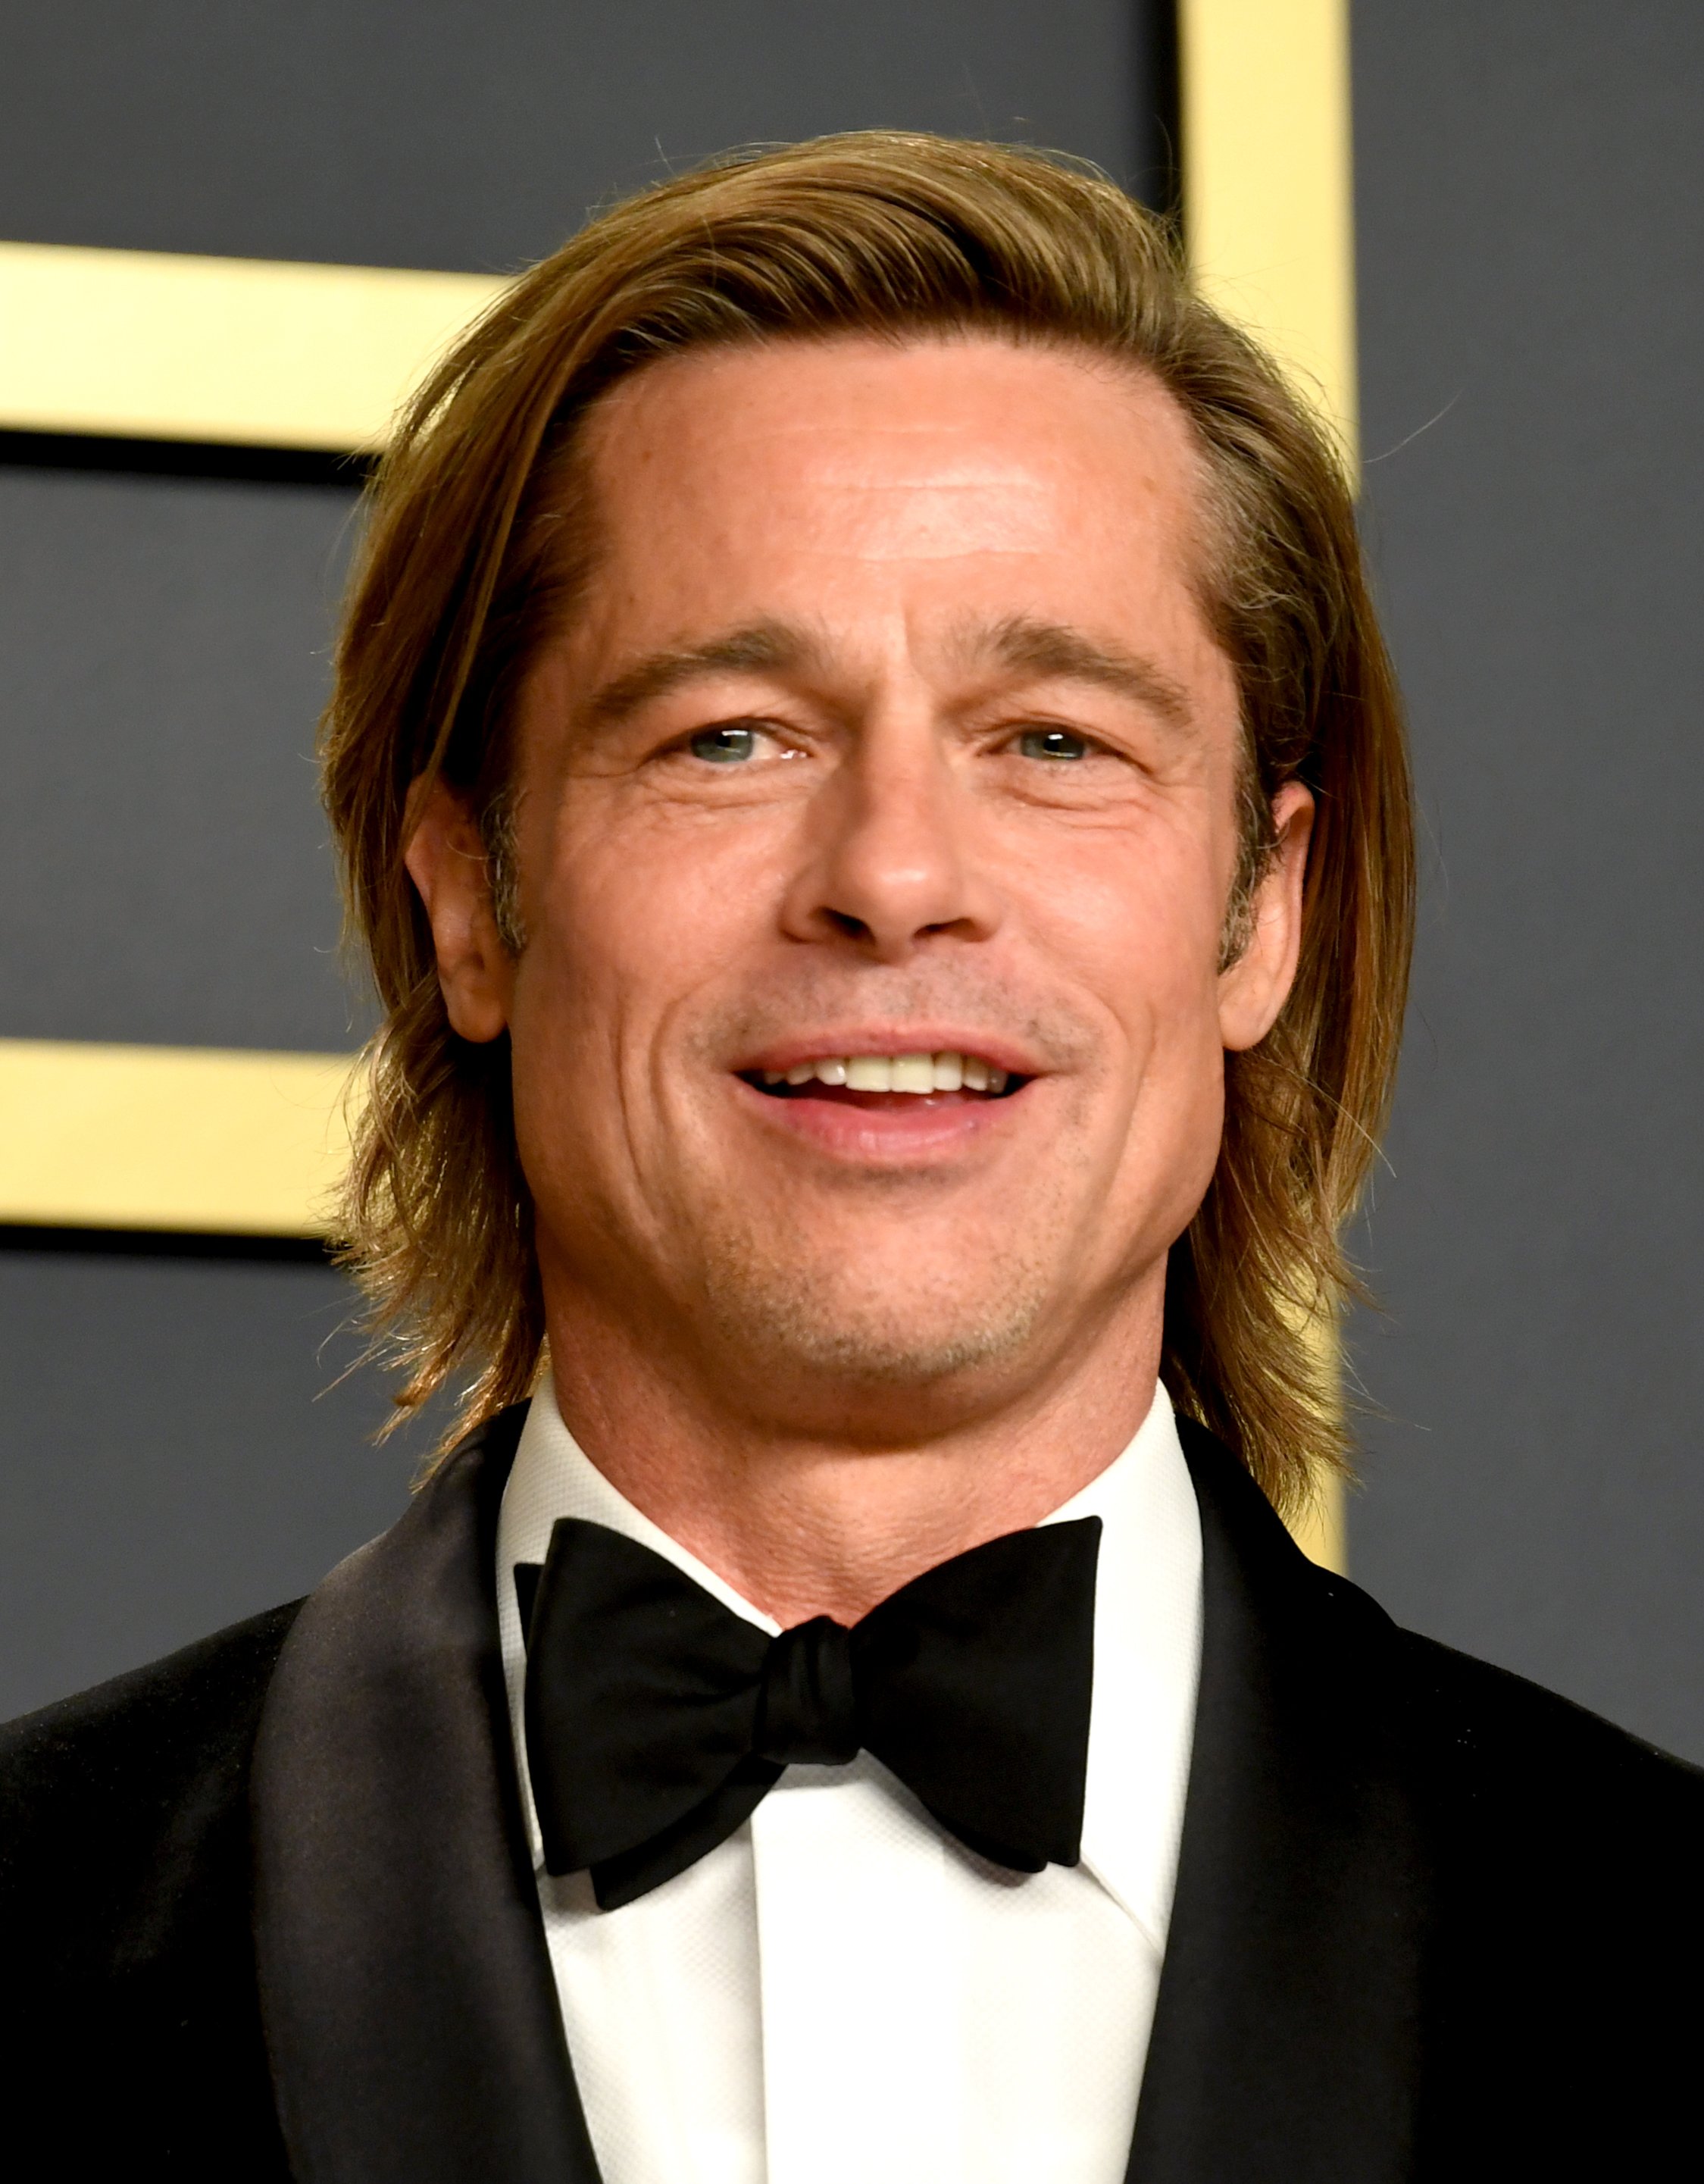 Brad Pitt in the press room at the 92nd Academy Awards held at the Dolby Theatre in Hollywood, Los Angeles, USA | Photo: Getty Images